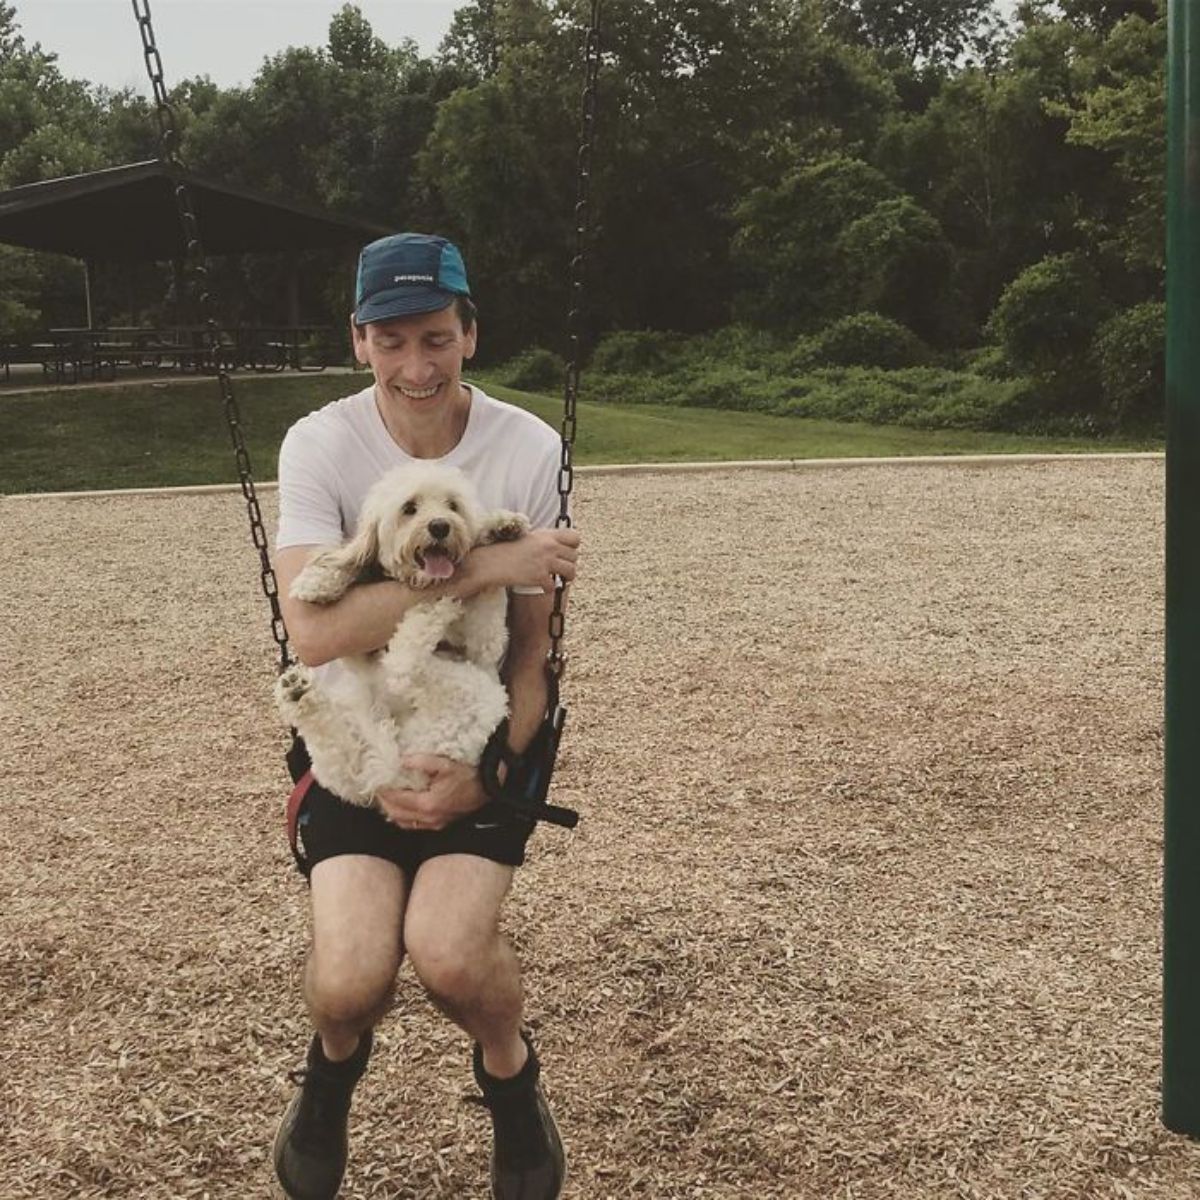 curly-haired white dog being held on a man going on a swing